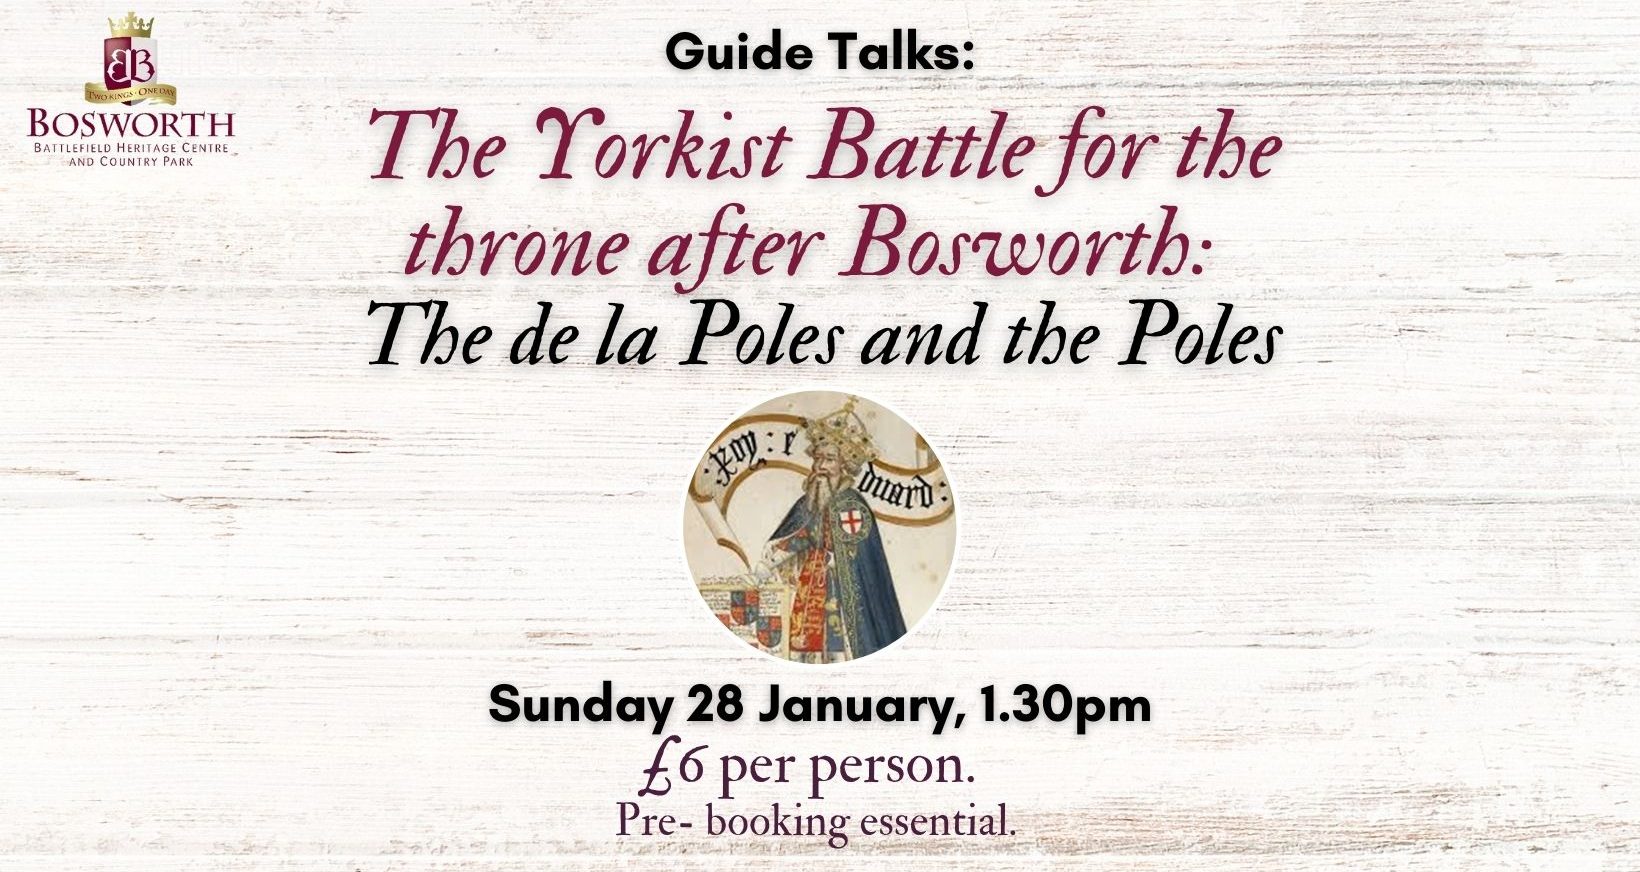 The Yorkist Battle for the Throne after Bosworth: The de la Poles and the Poles